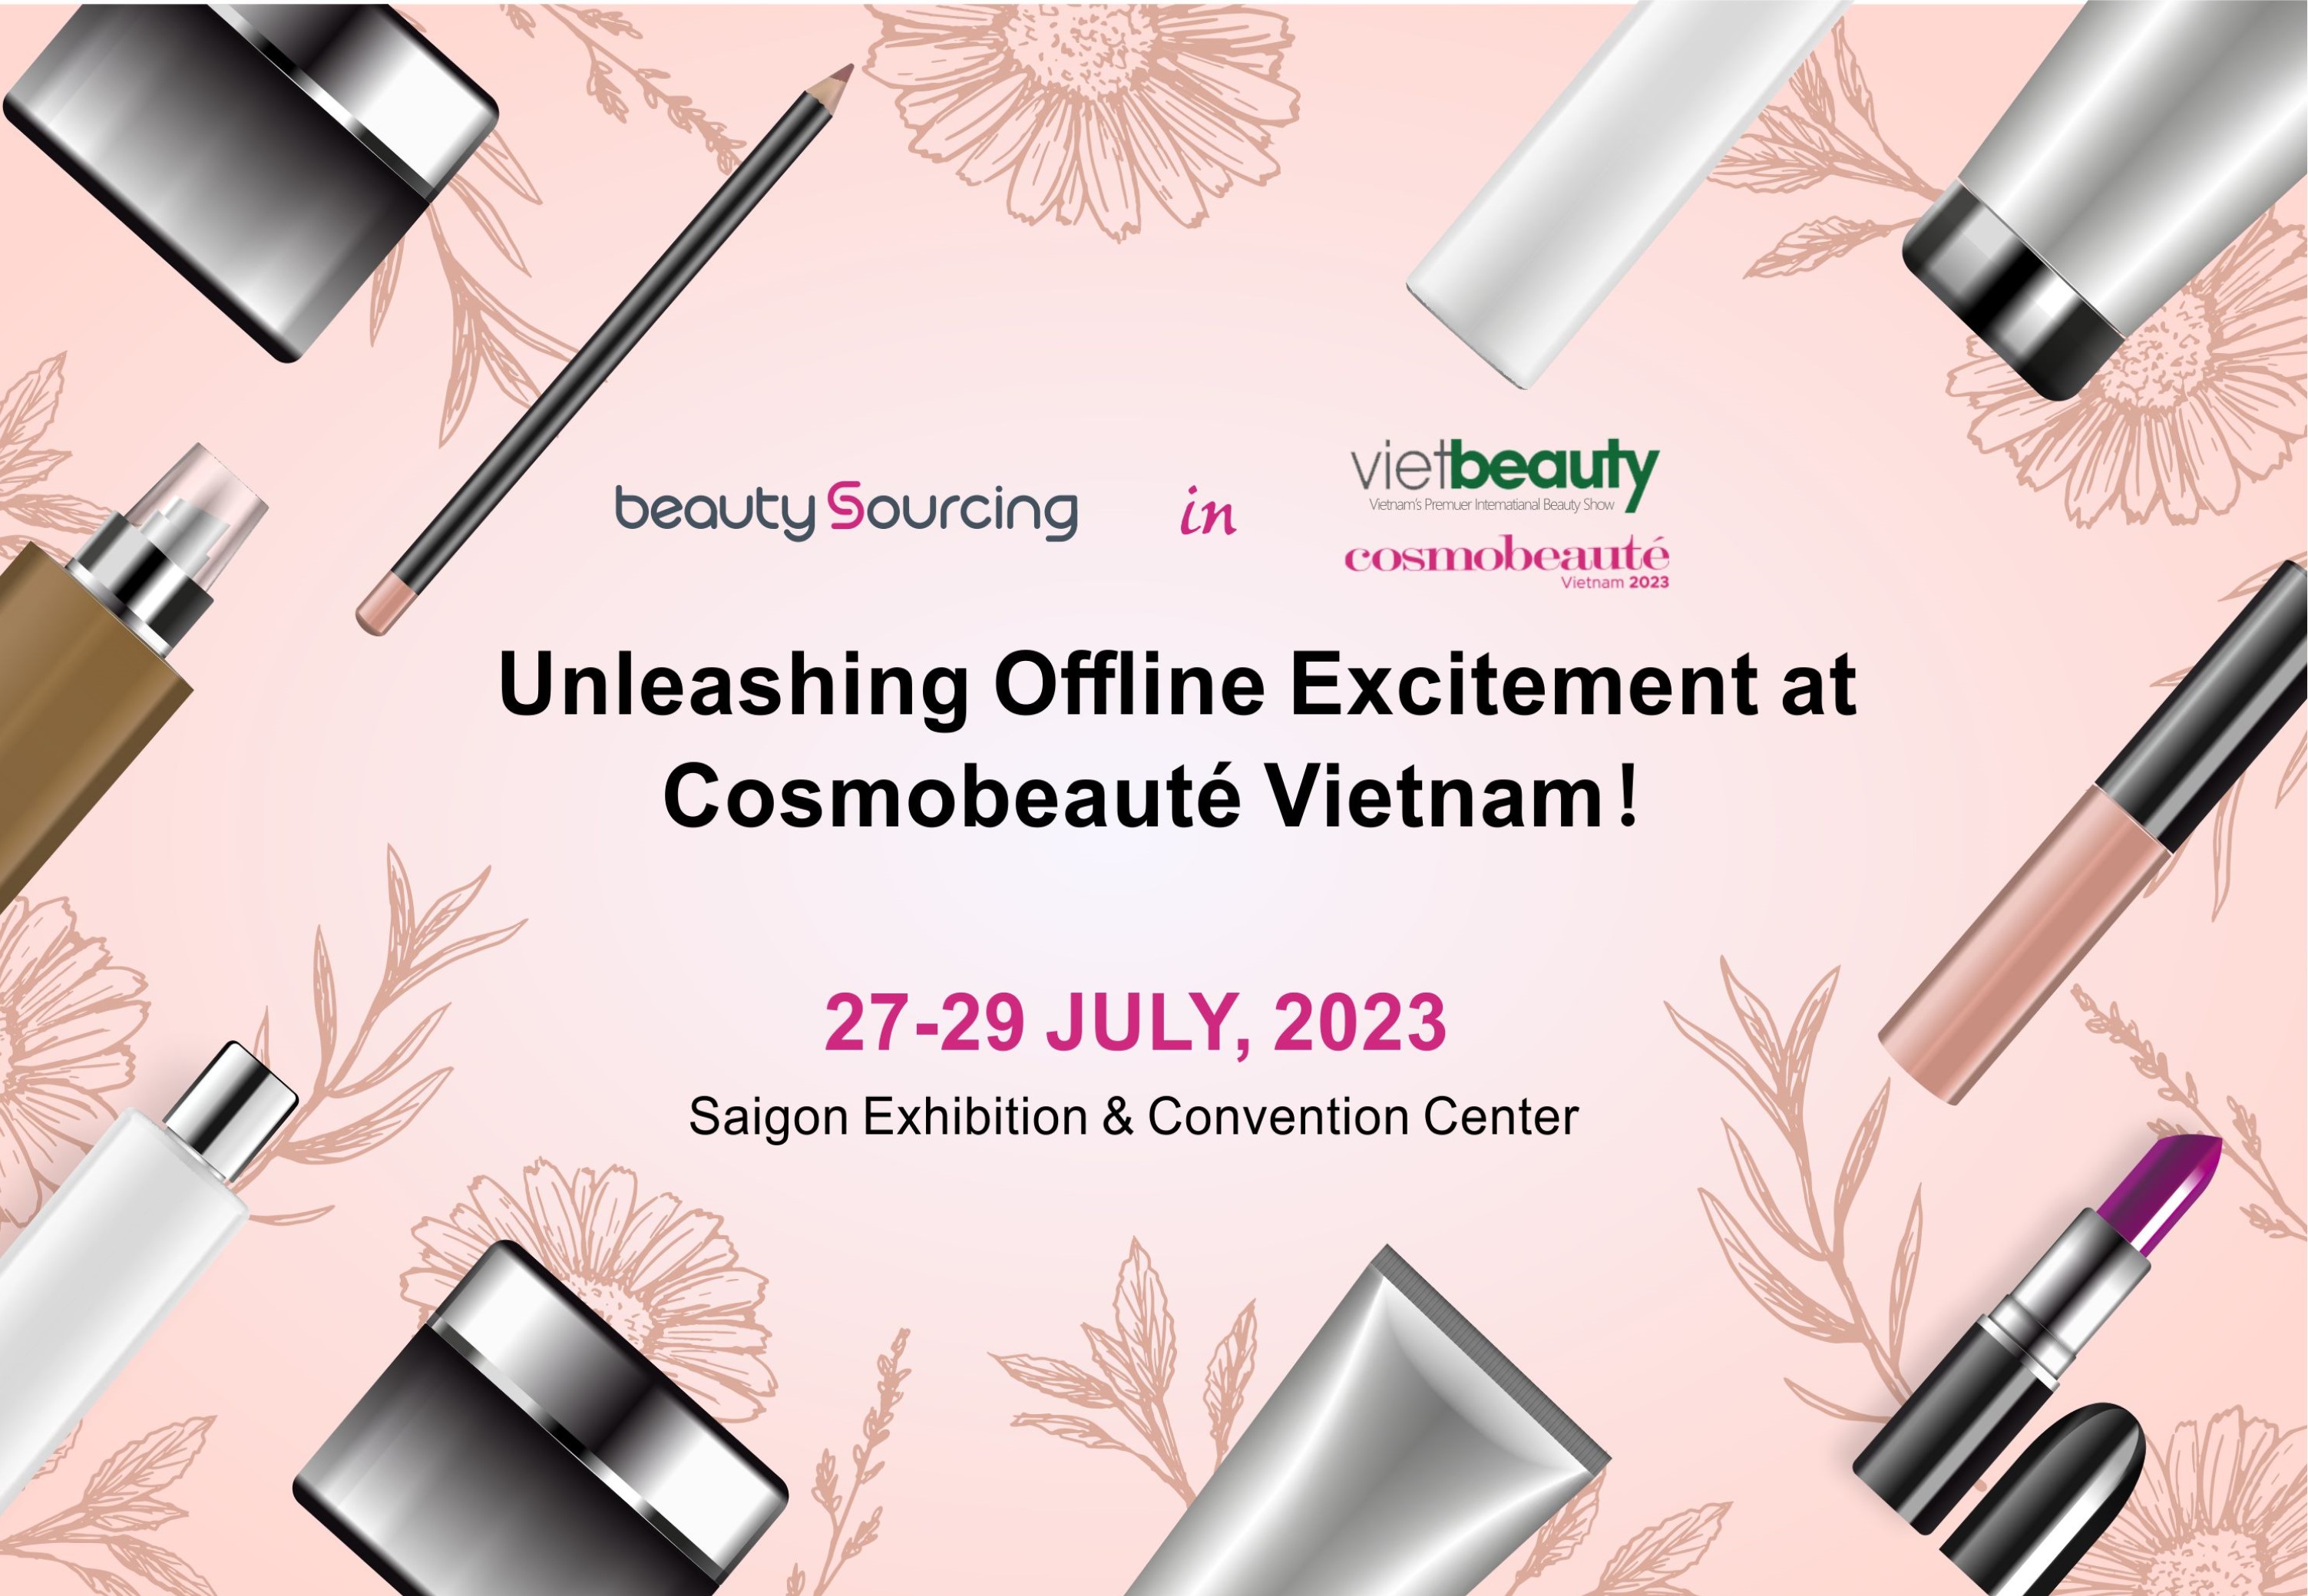 BeautySourcing Unites 26 Suppliers to Meet the Rising Demand for Beauty Supply Sourcing Transfer from China to Vietnam